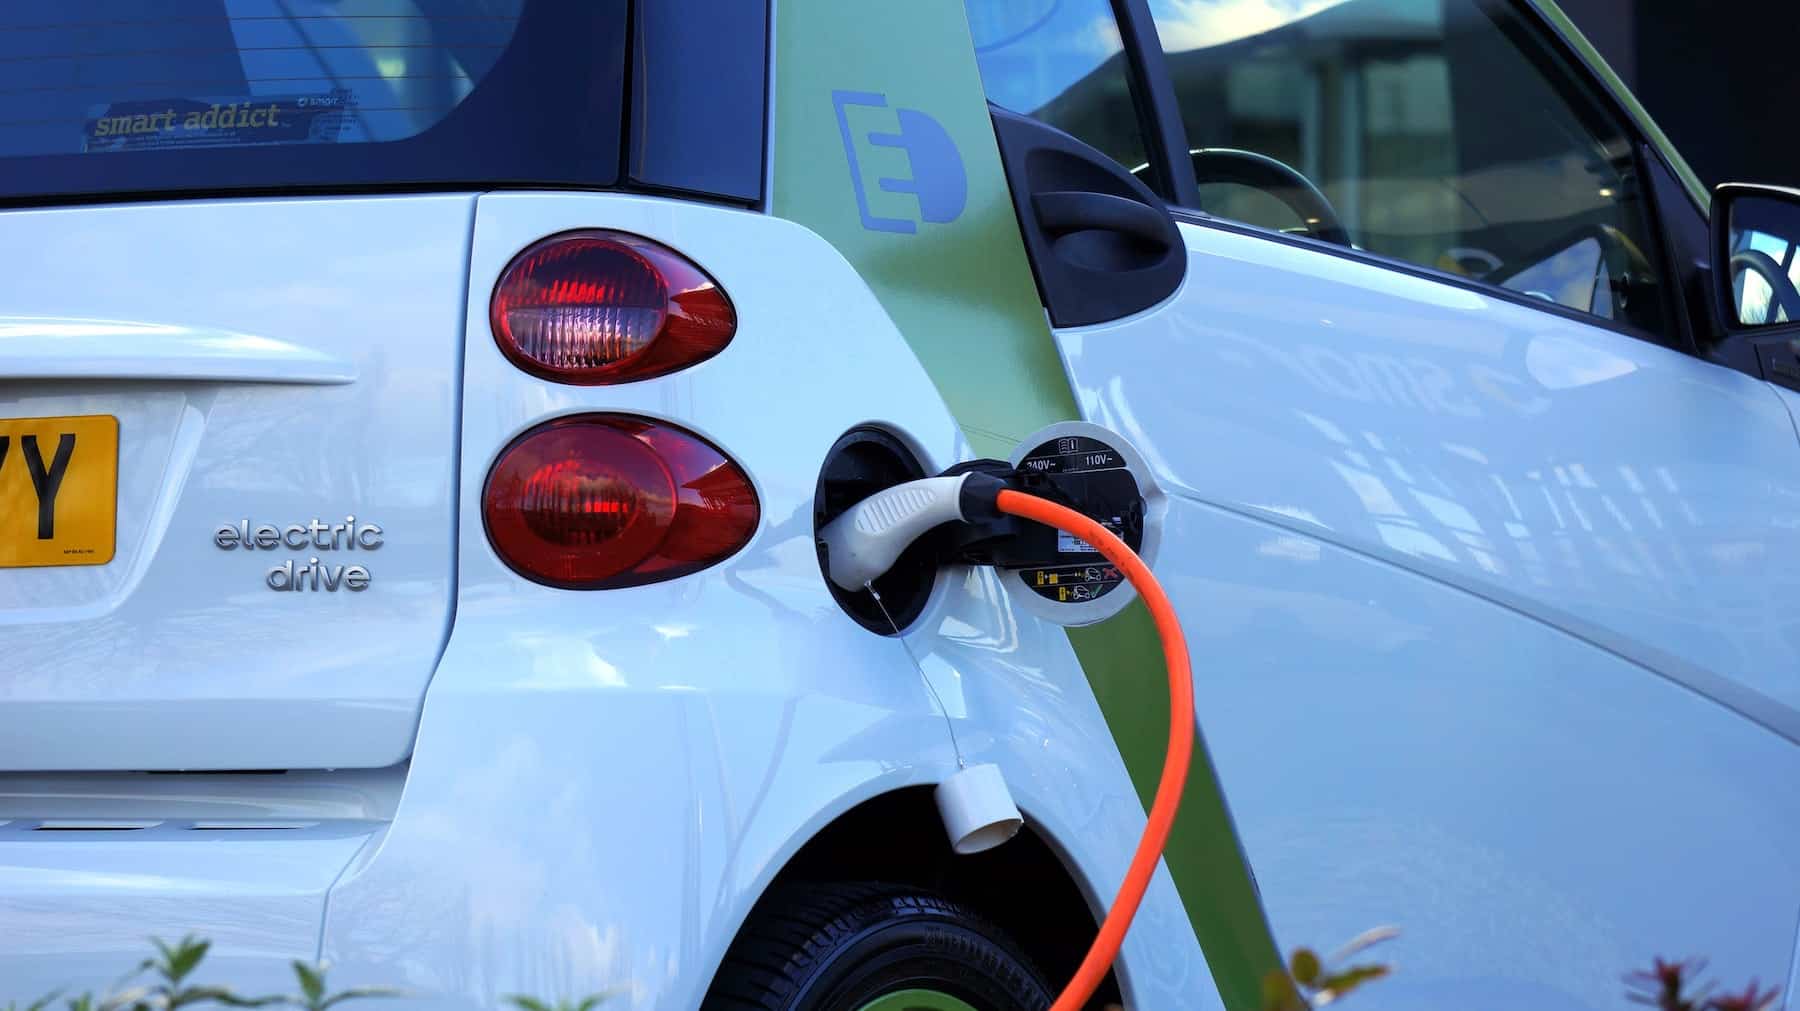 Are car rental companies ready for EV vehicles